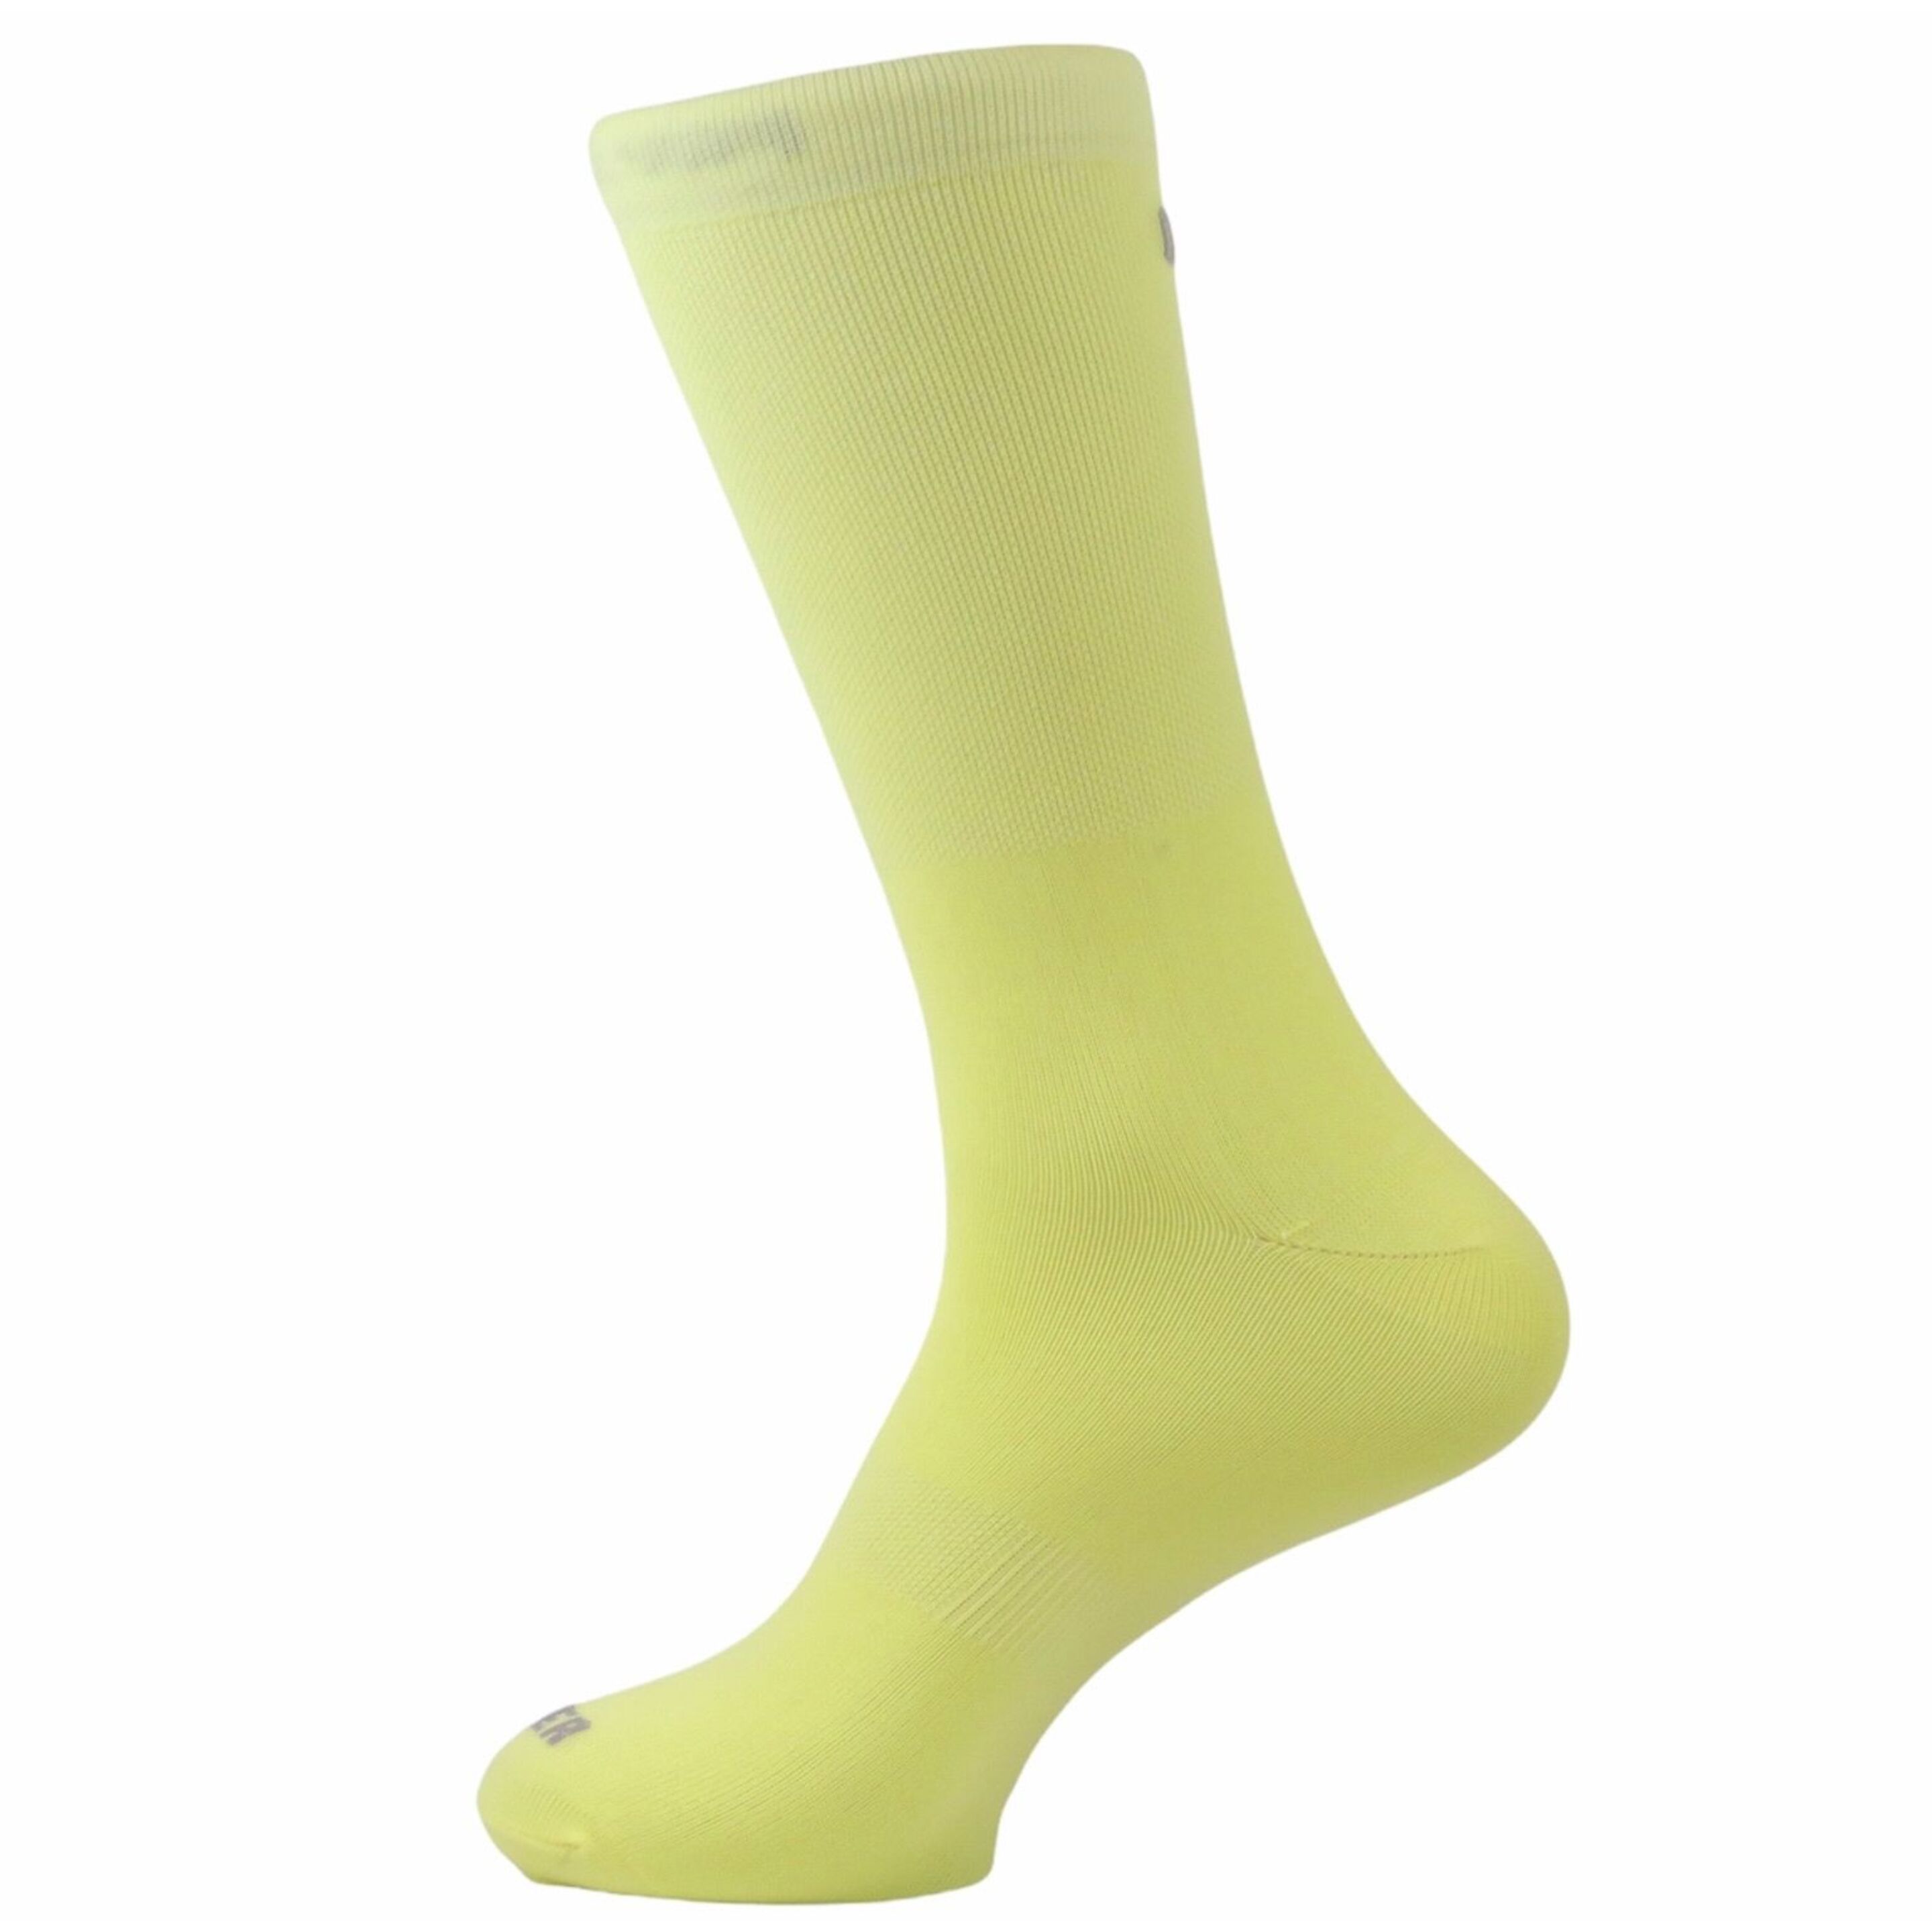 Meias Ciclismo Mooquer Classy Yellow - Amarelo | Sport Zone MKP